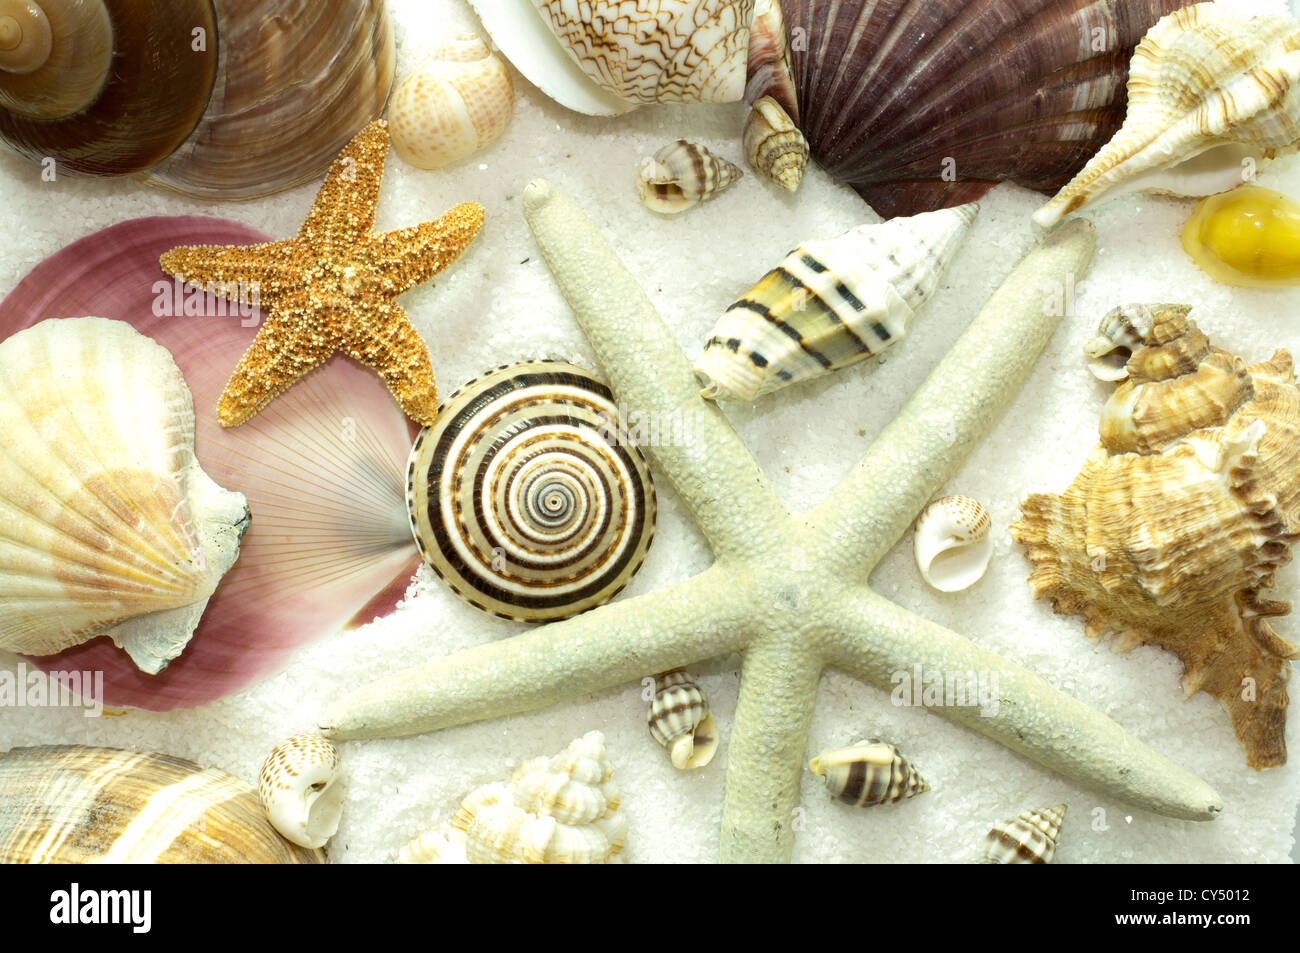 Background pattern of seashells, starfish, sea snails, on a bed of white sand Stock Photo